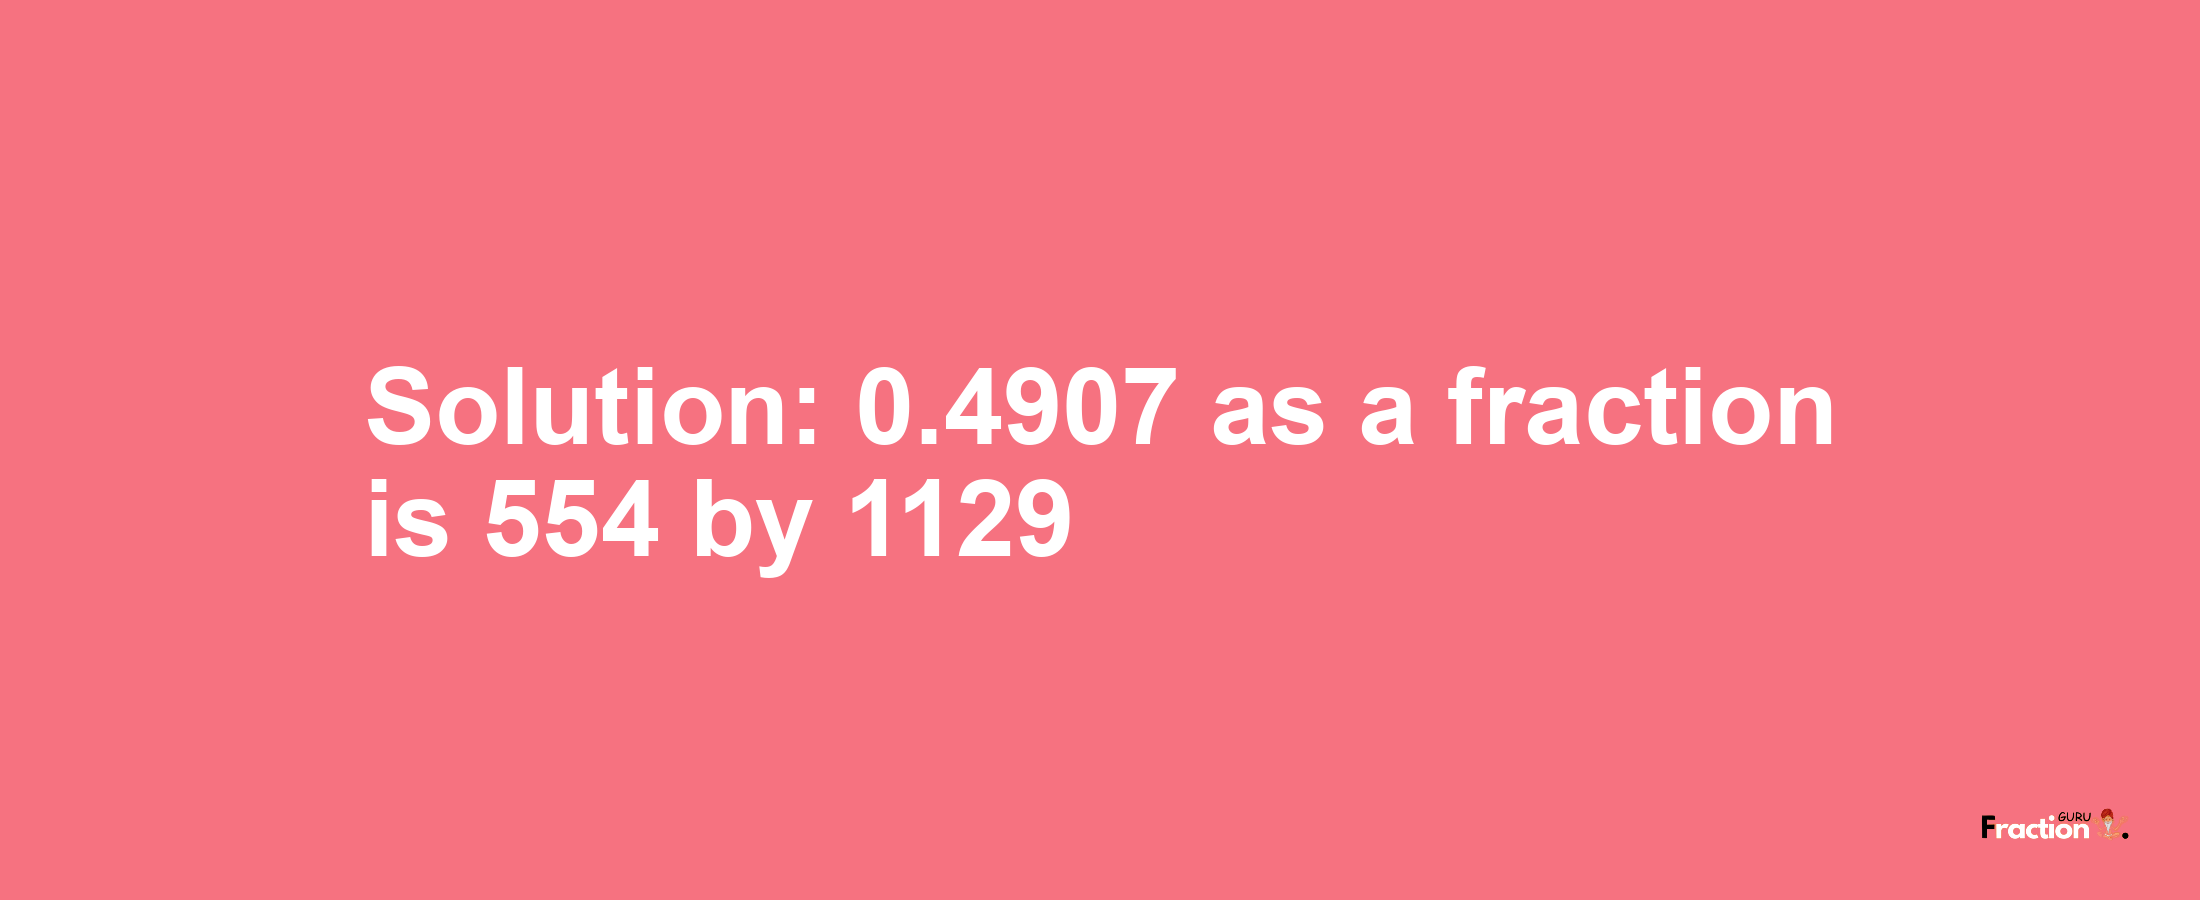 Solution:0.4907 as a fraction is 554/1129